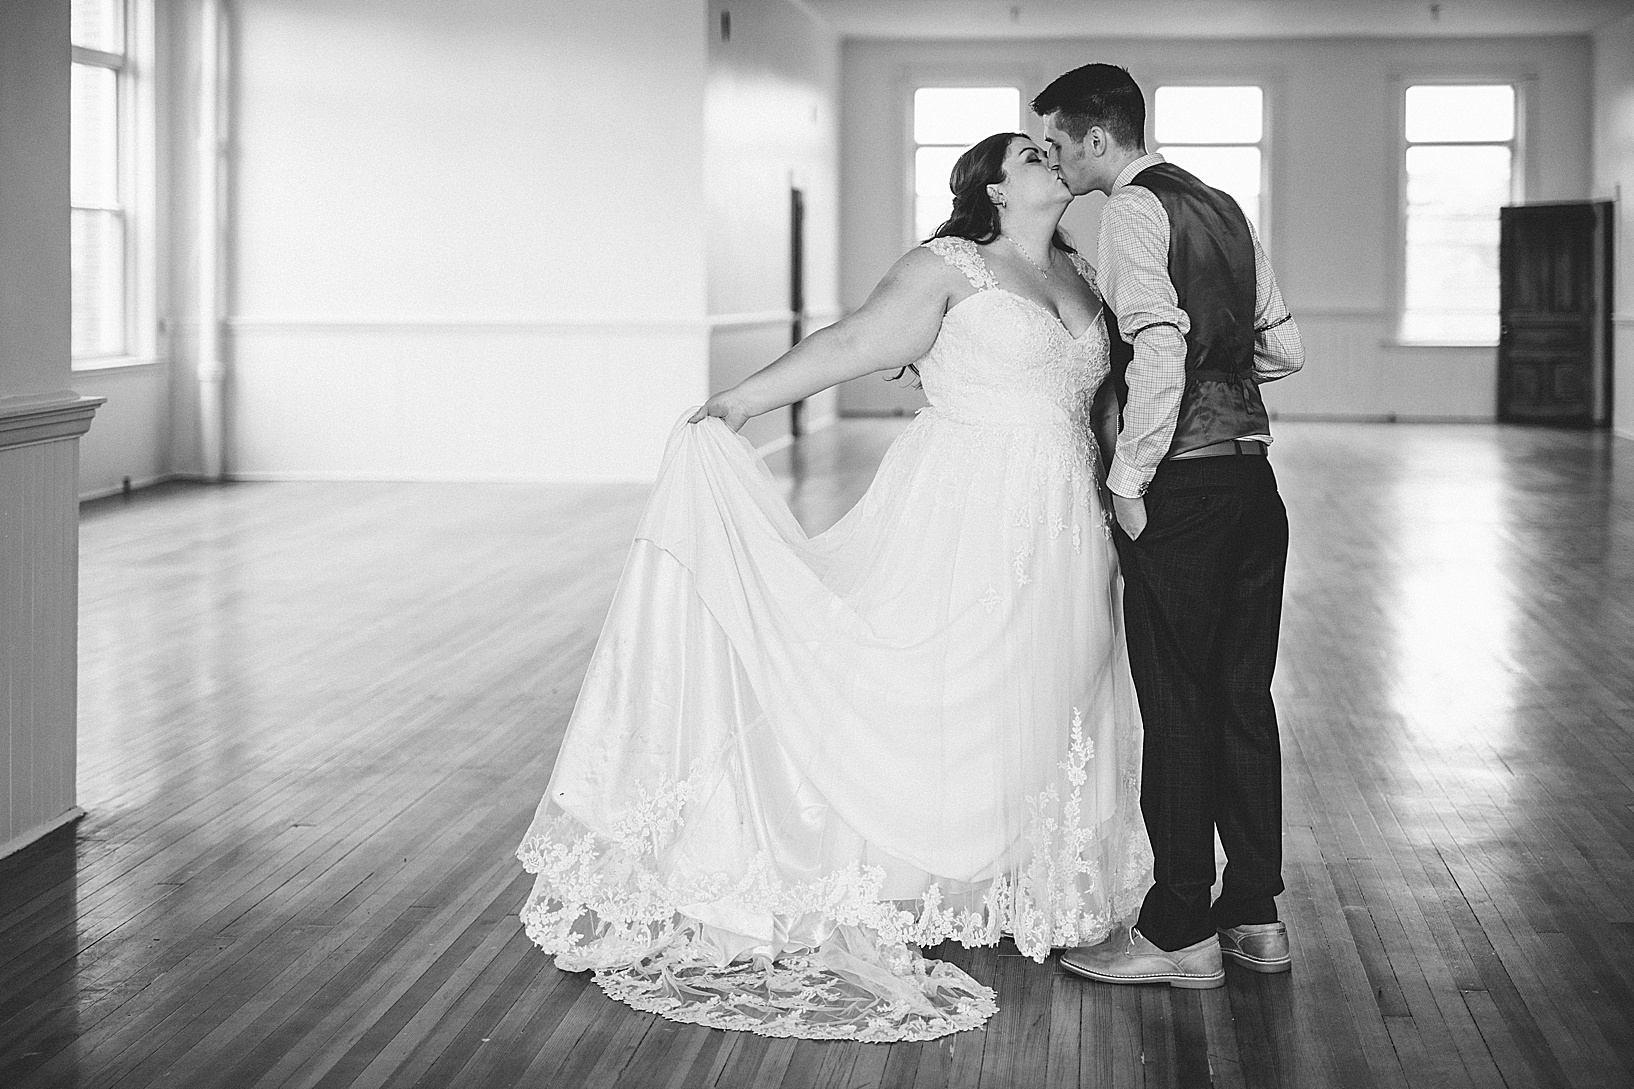 Bride and groom kiss in an empty room with wood floors